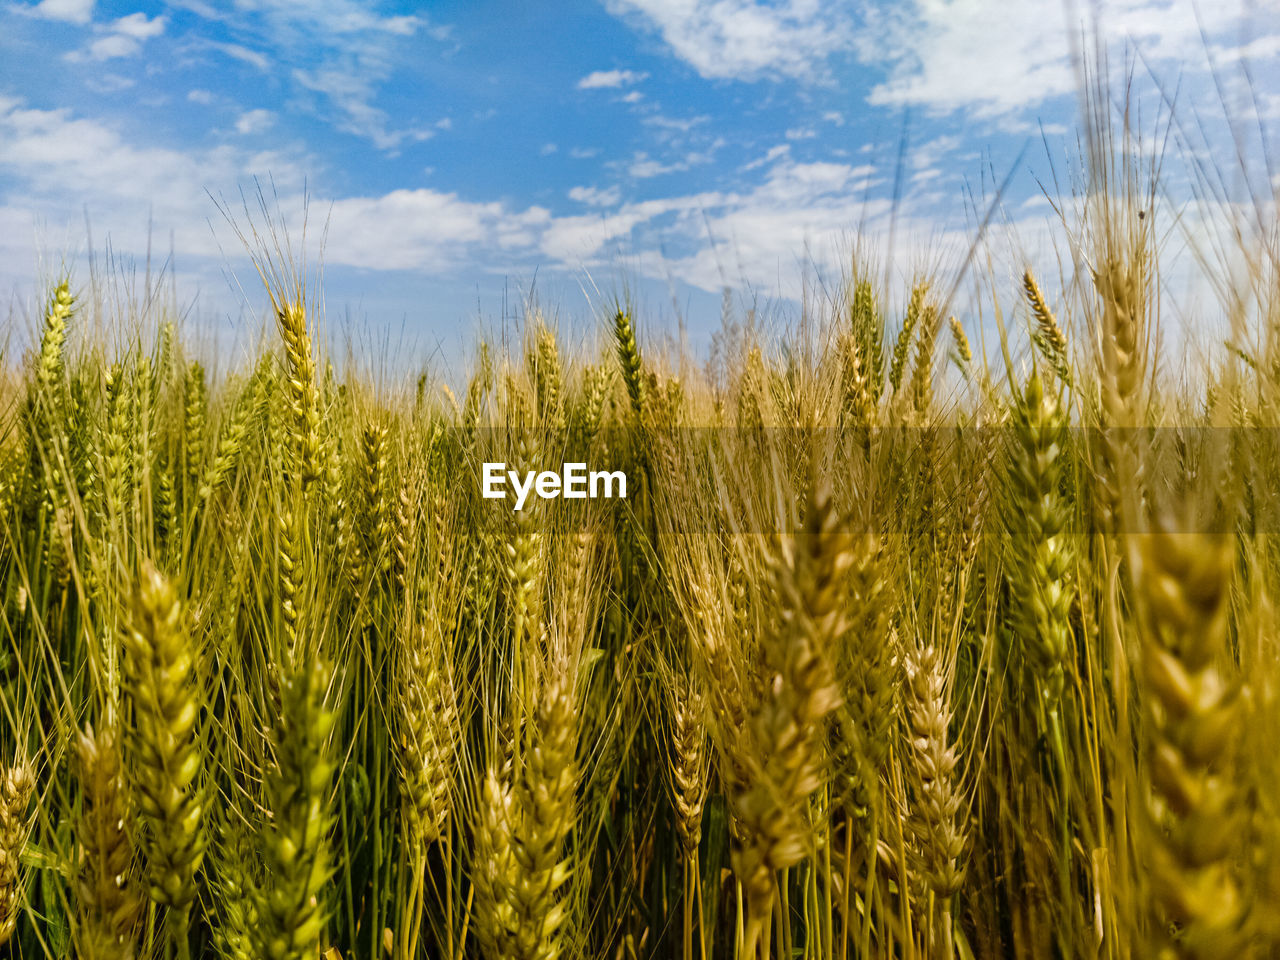 CLOSE-UP OF WHEAT GROWING ON FIELD